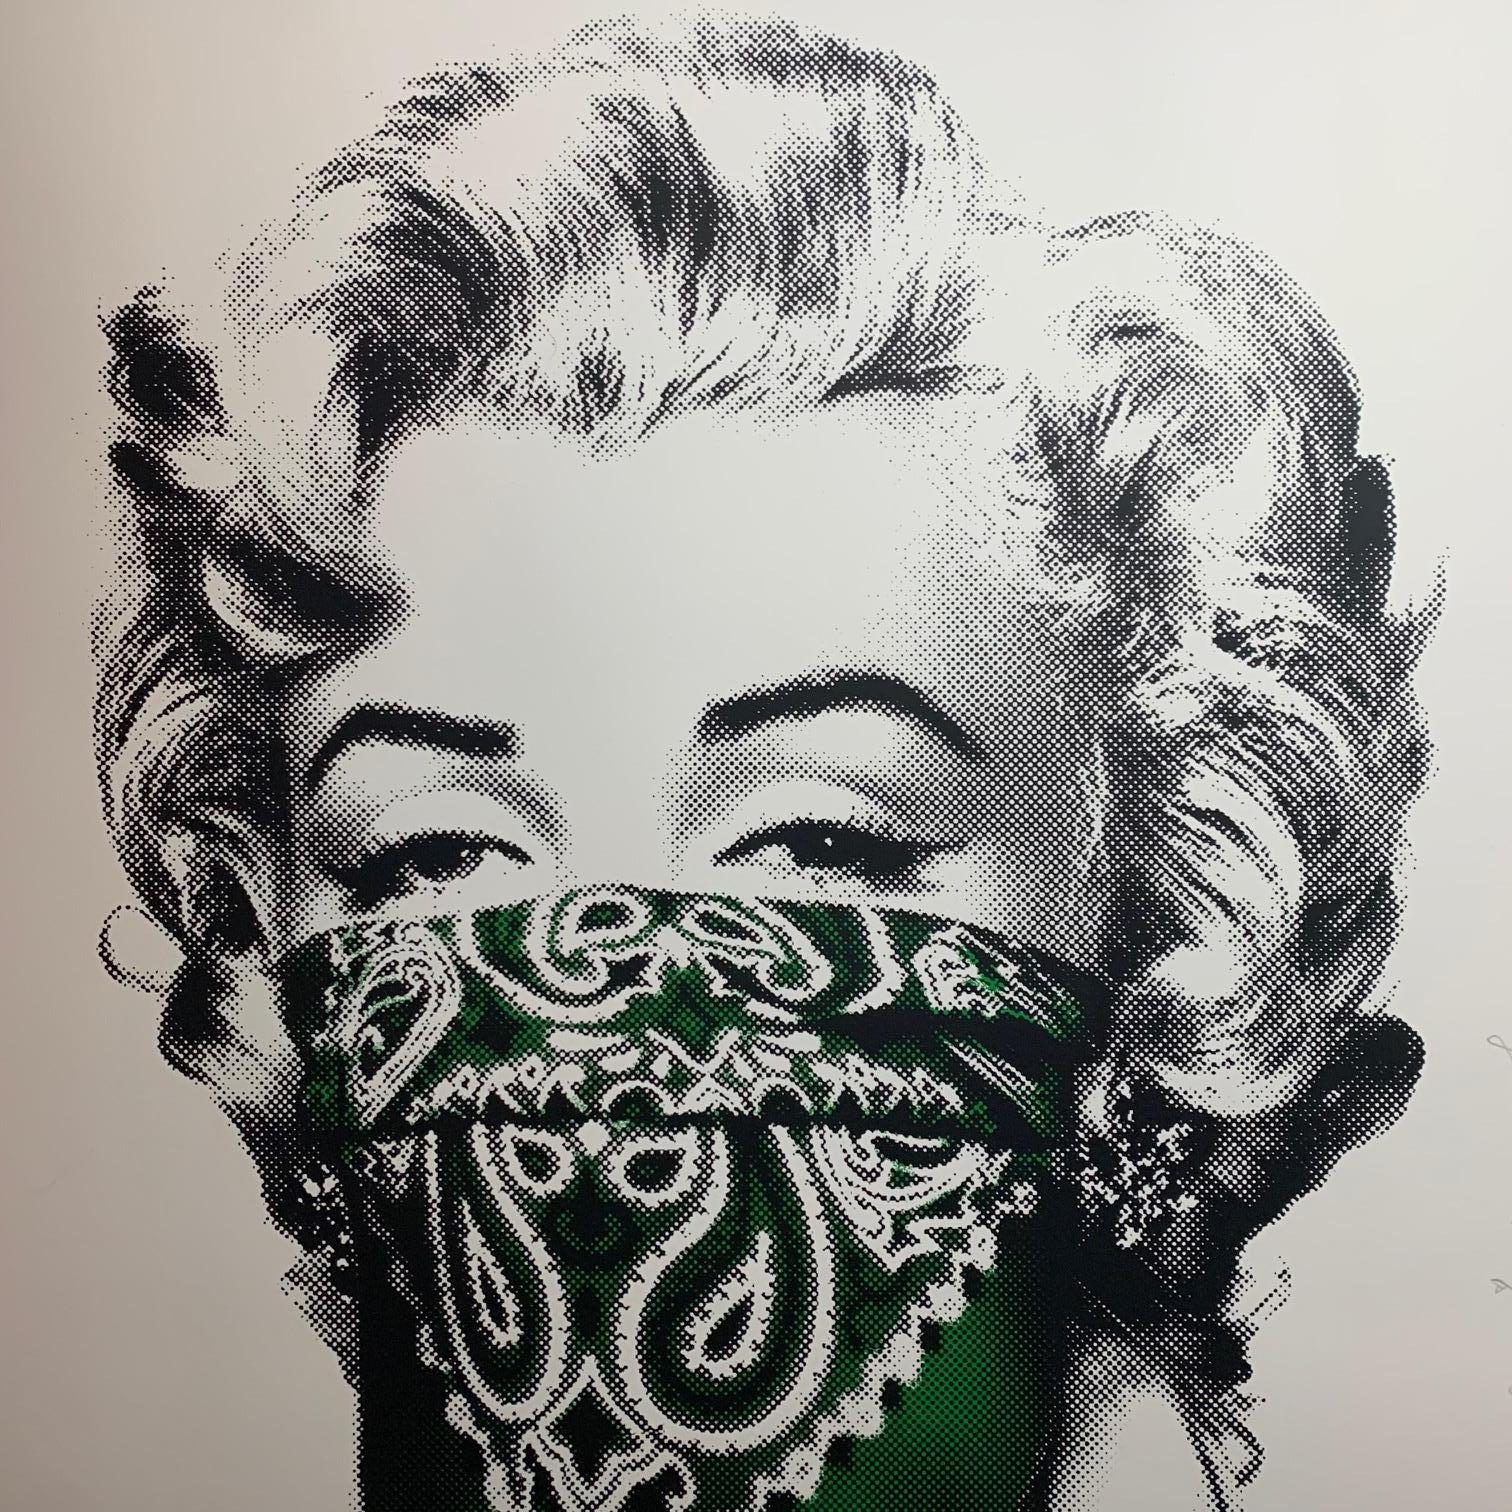 In celebration of Marilyn Monroe’s birthday on June 1st, we will be releasing Stay Safe, a new limited edition screen print. Each two-color screen print is hand torn, signed, and numbered with a thumbprint on the back.

Marilyn Monroe 2020 